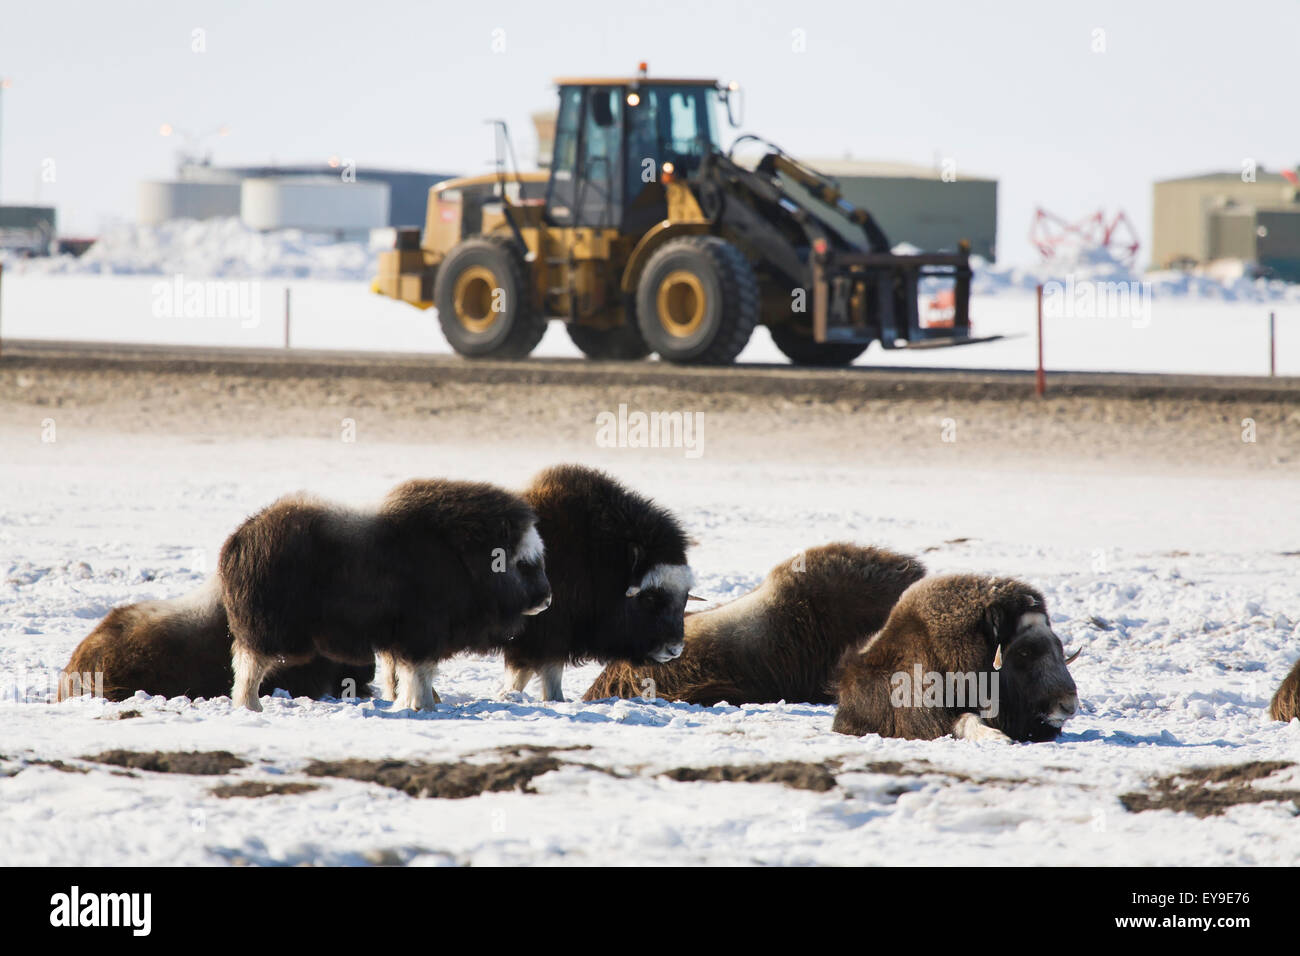 Musk ox lying on the frozen tundra with a loader driving by in the Prudhoe Bay Oilfield, North Slope, Arctic, Alaska Stock Photo